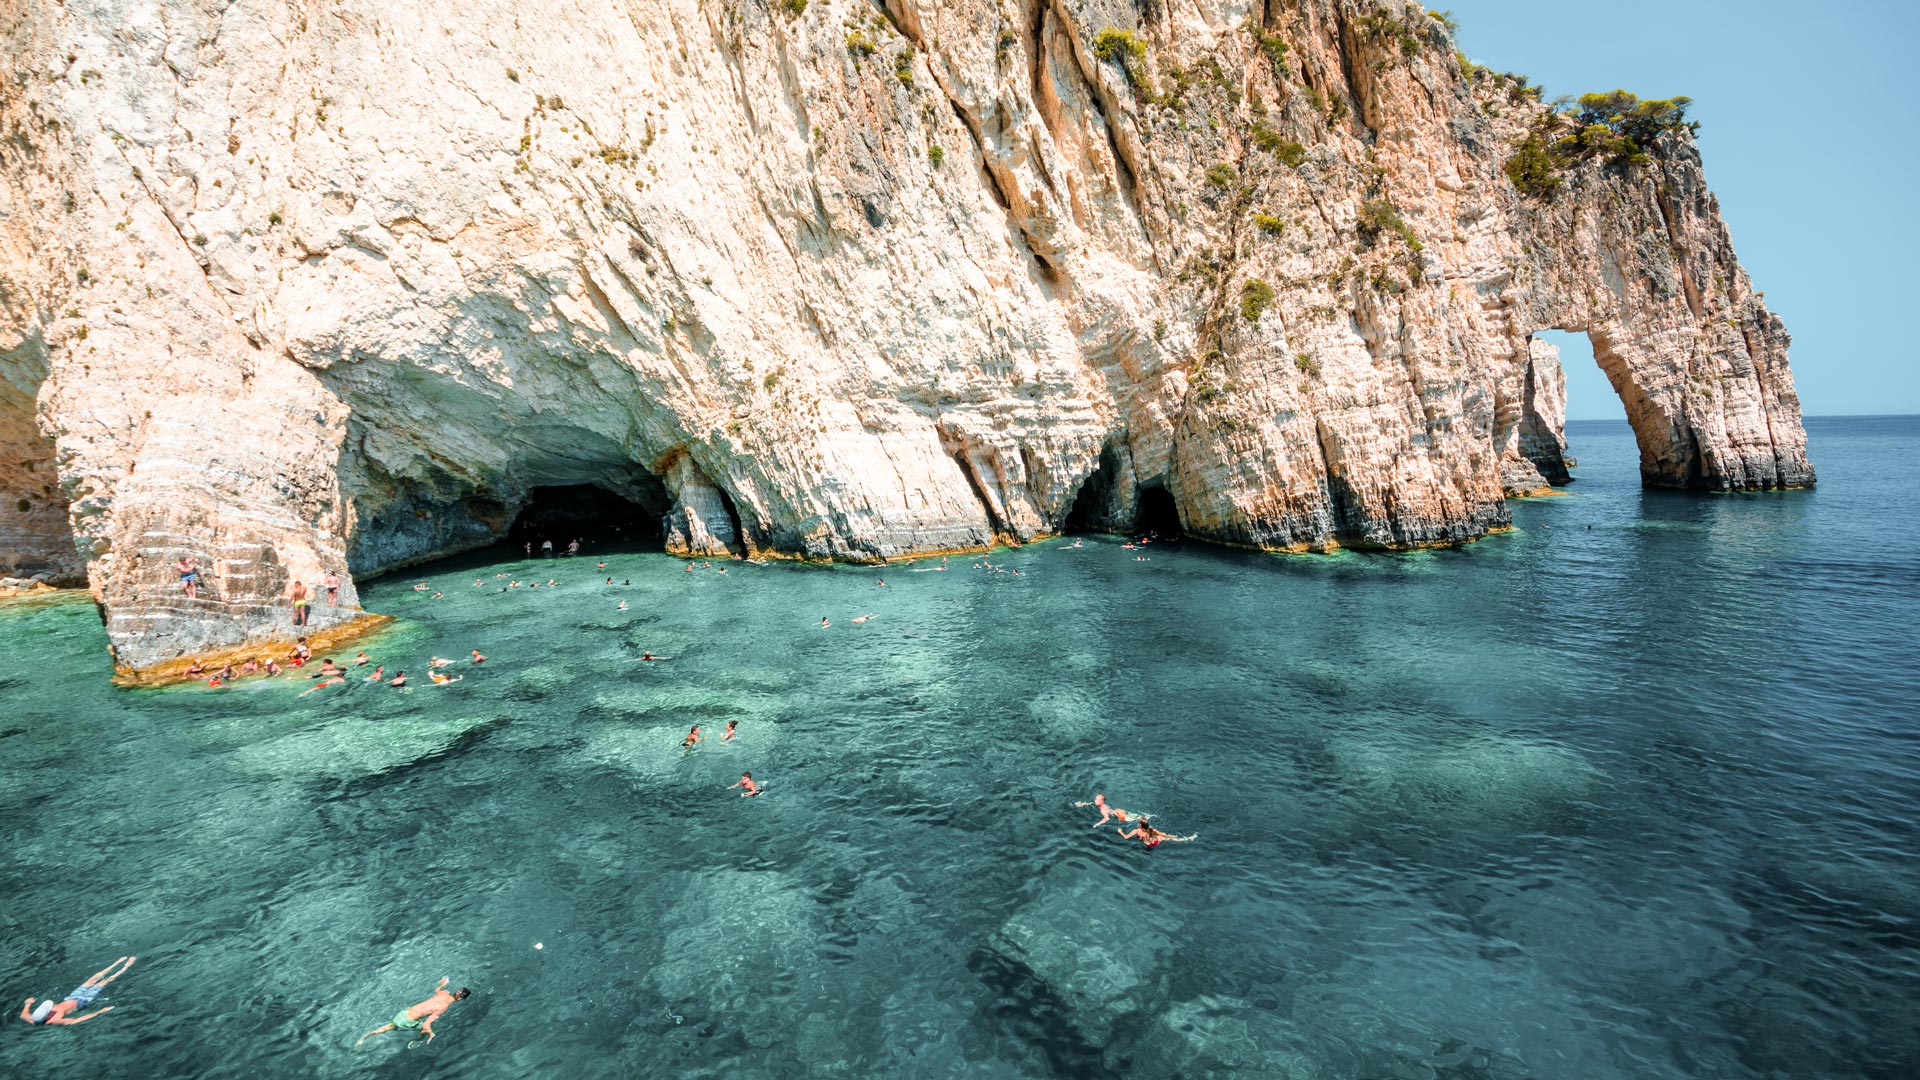 Just make sure you stop for a snorkel whilst you’re in the Blue Caves of Zakynthos